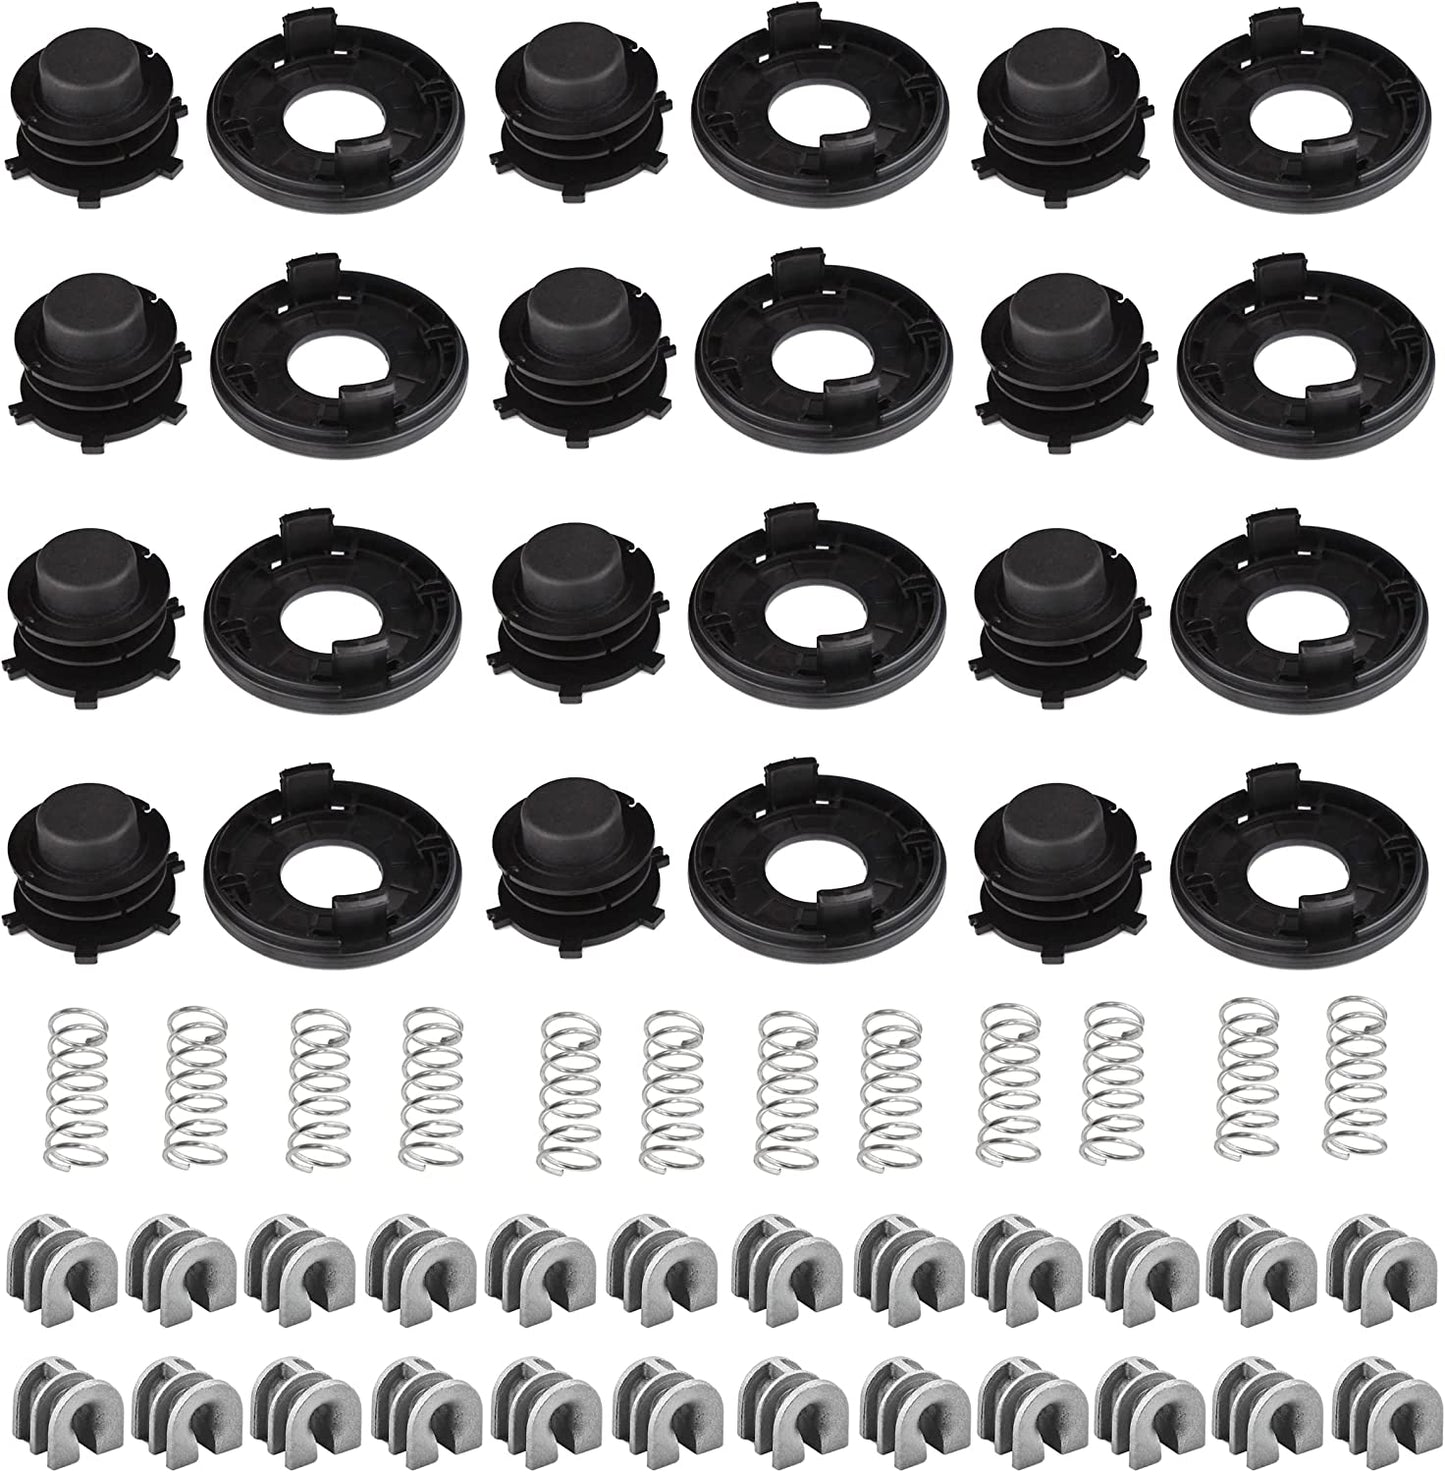 25-2 Trimmer Head, Spool Cover Spring Eyelet Replacement Parts Fit for Sthilt